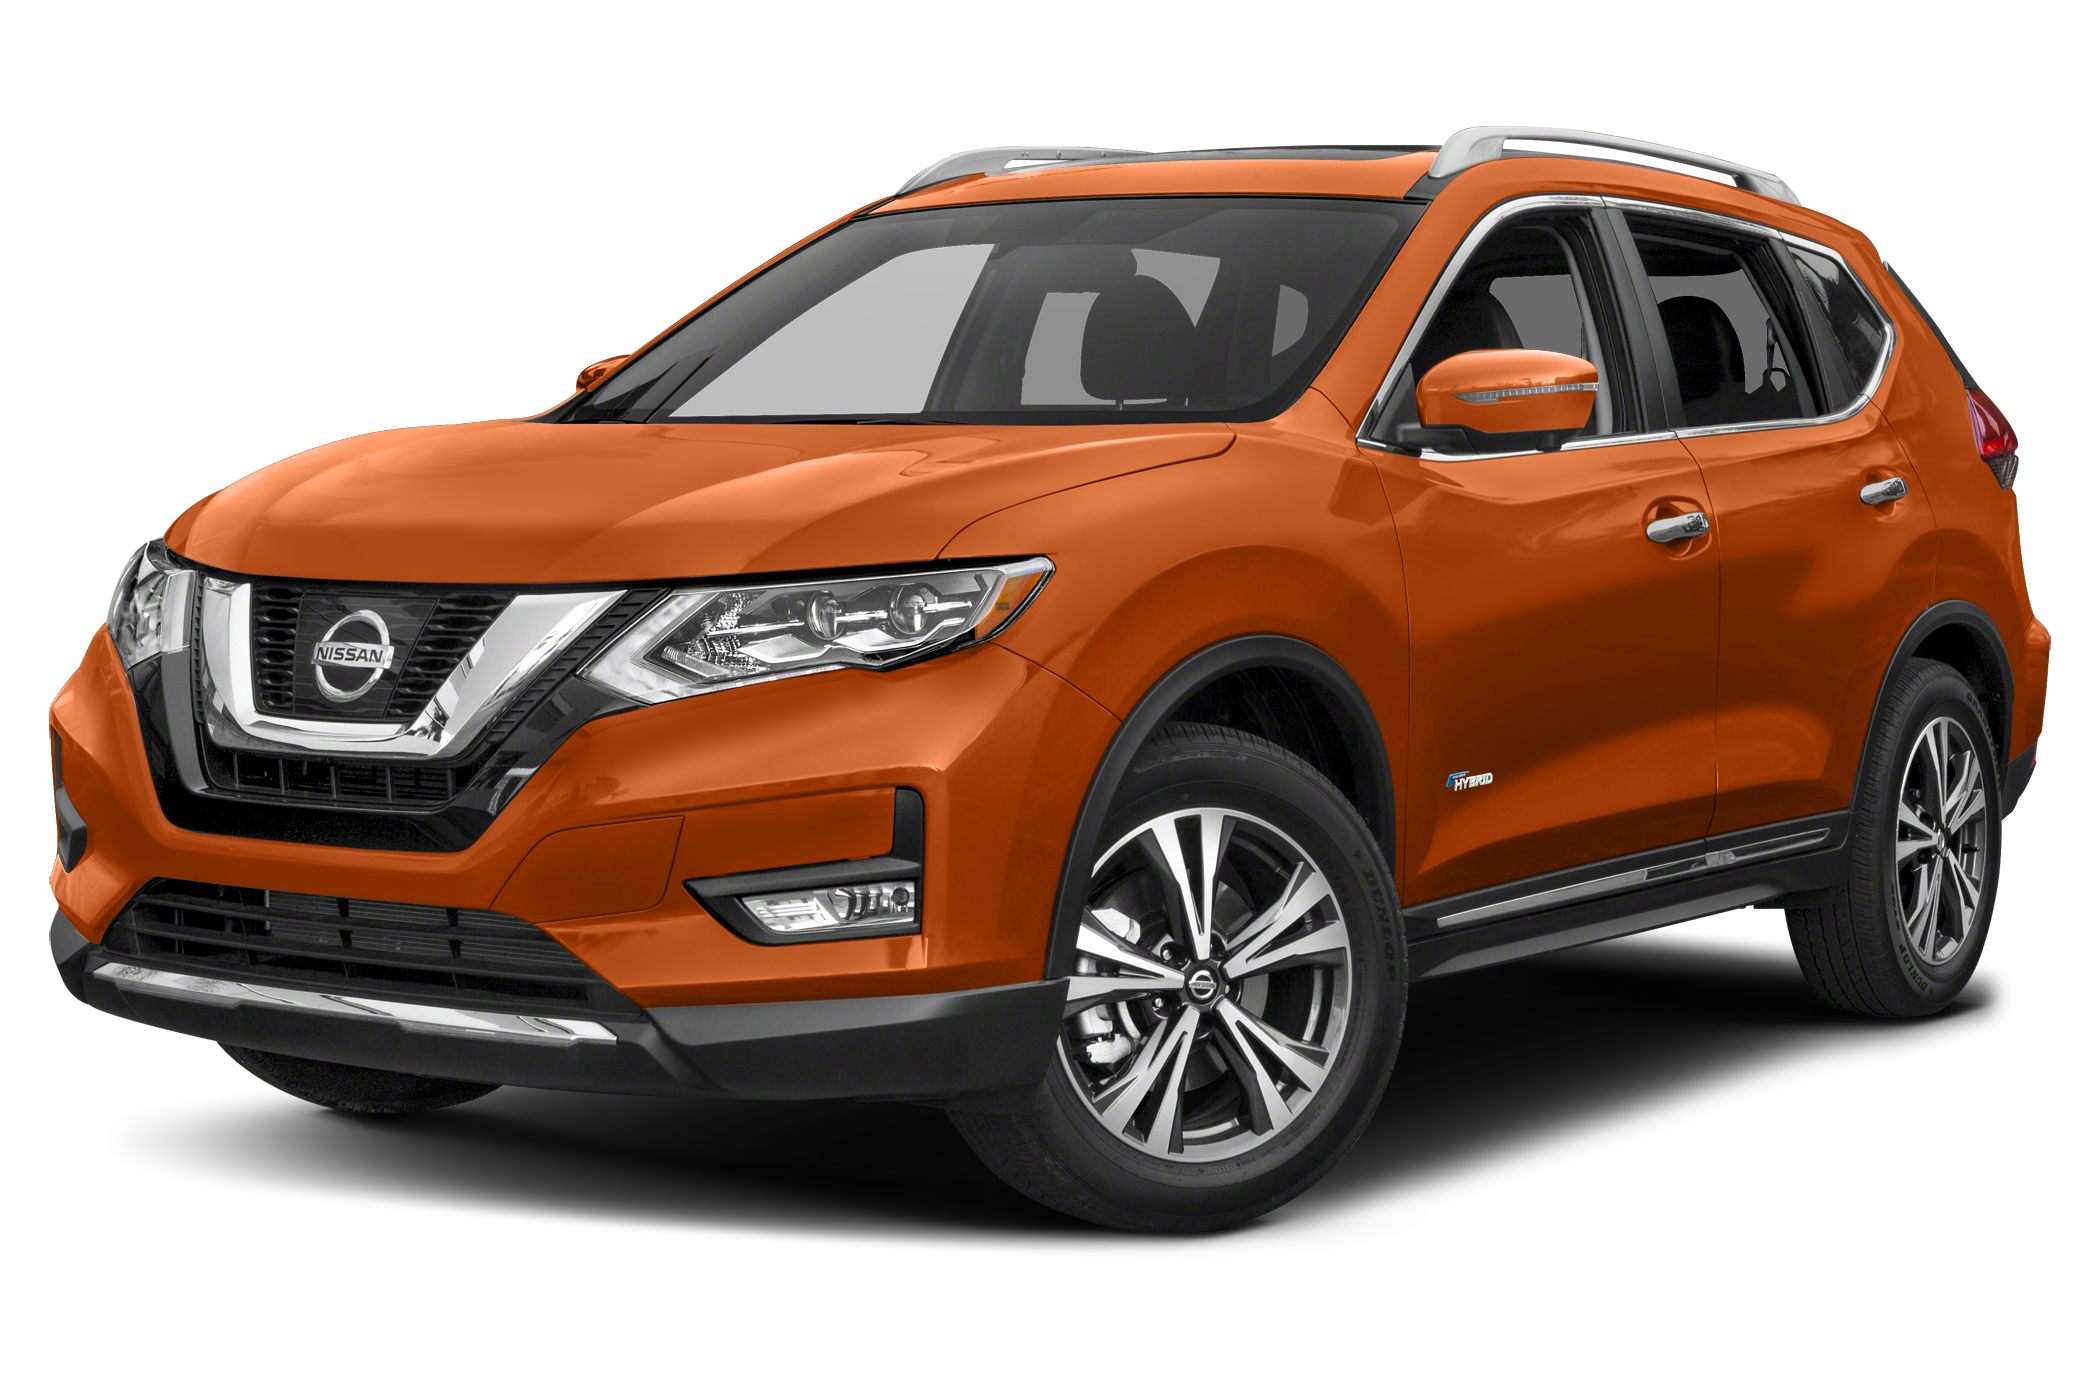 2018 Nissan Rogue Hybrid Prices, Reviews & Vehicle Overview - CarsDirect